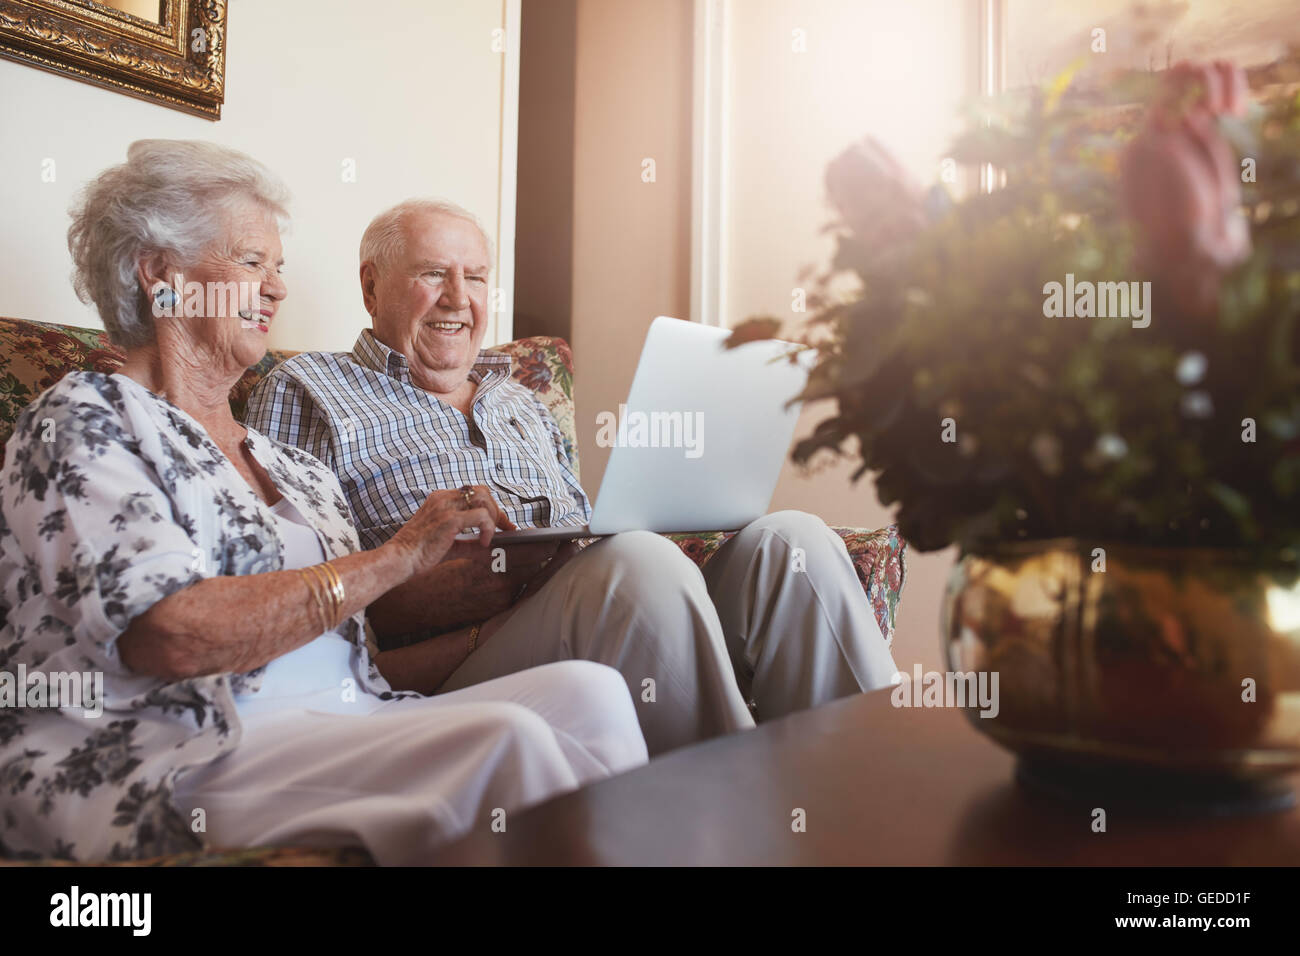 Portrait of smiling senior couple sitting together at home and surfing internet on laptop. Old man and woman relaxing on a sofa Stock Photo